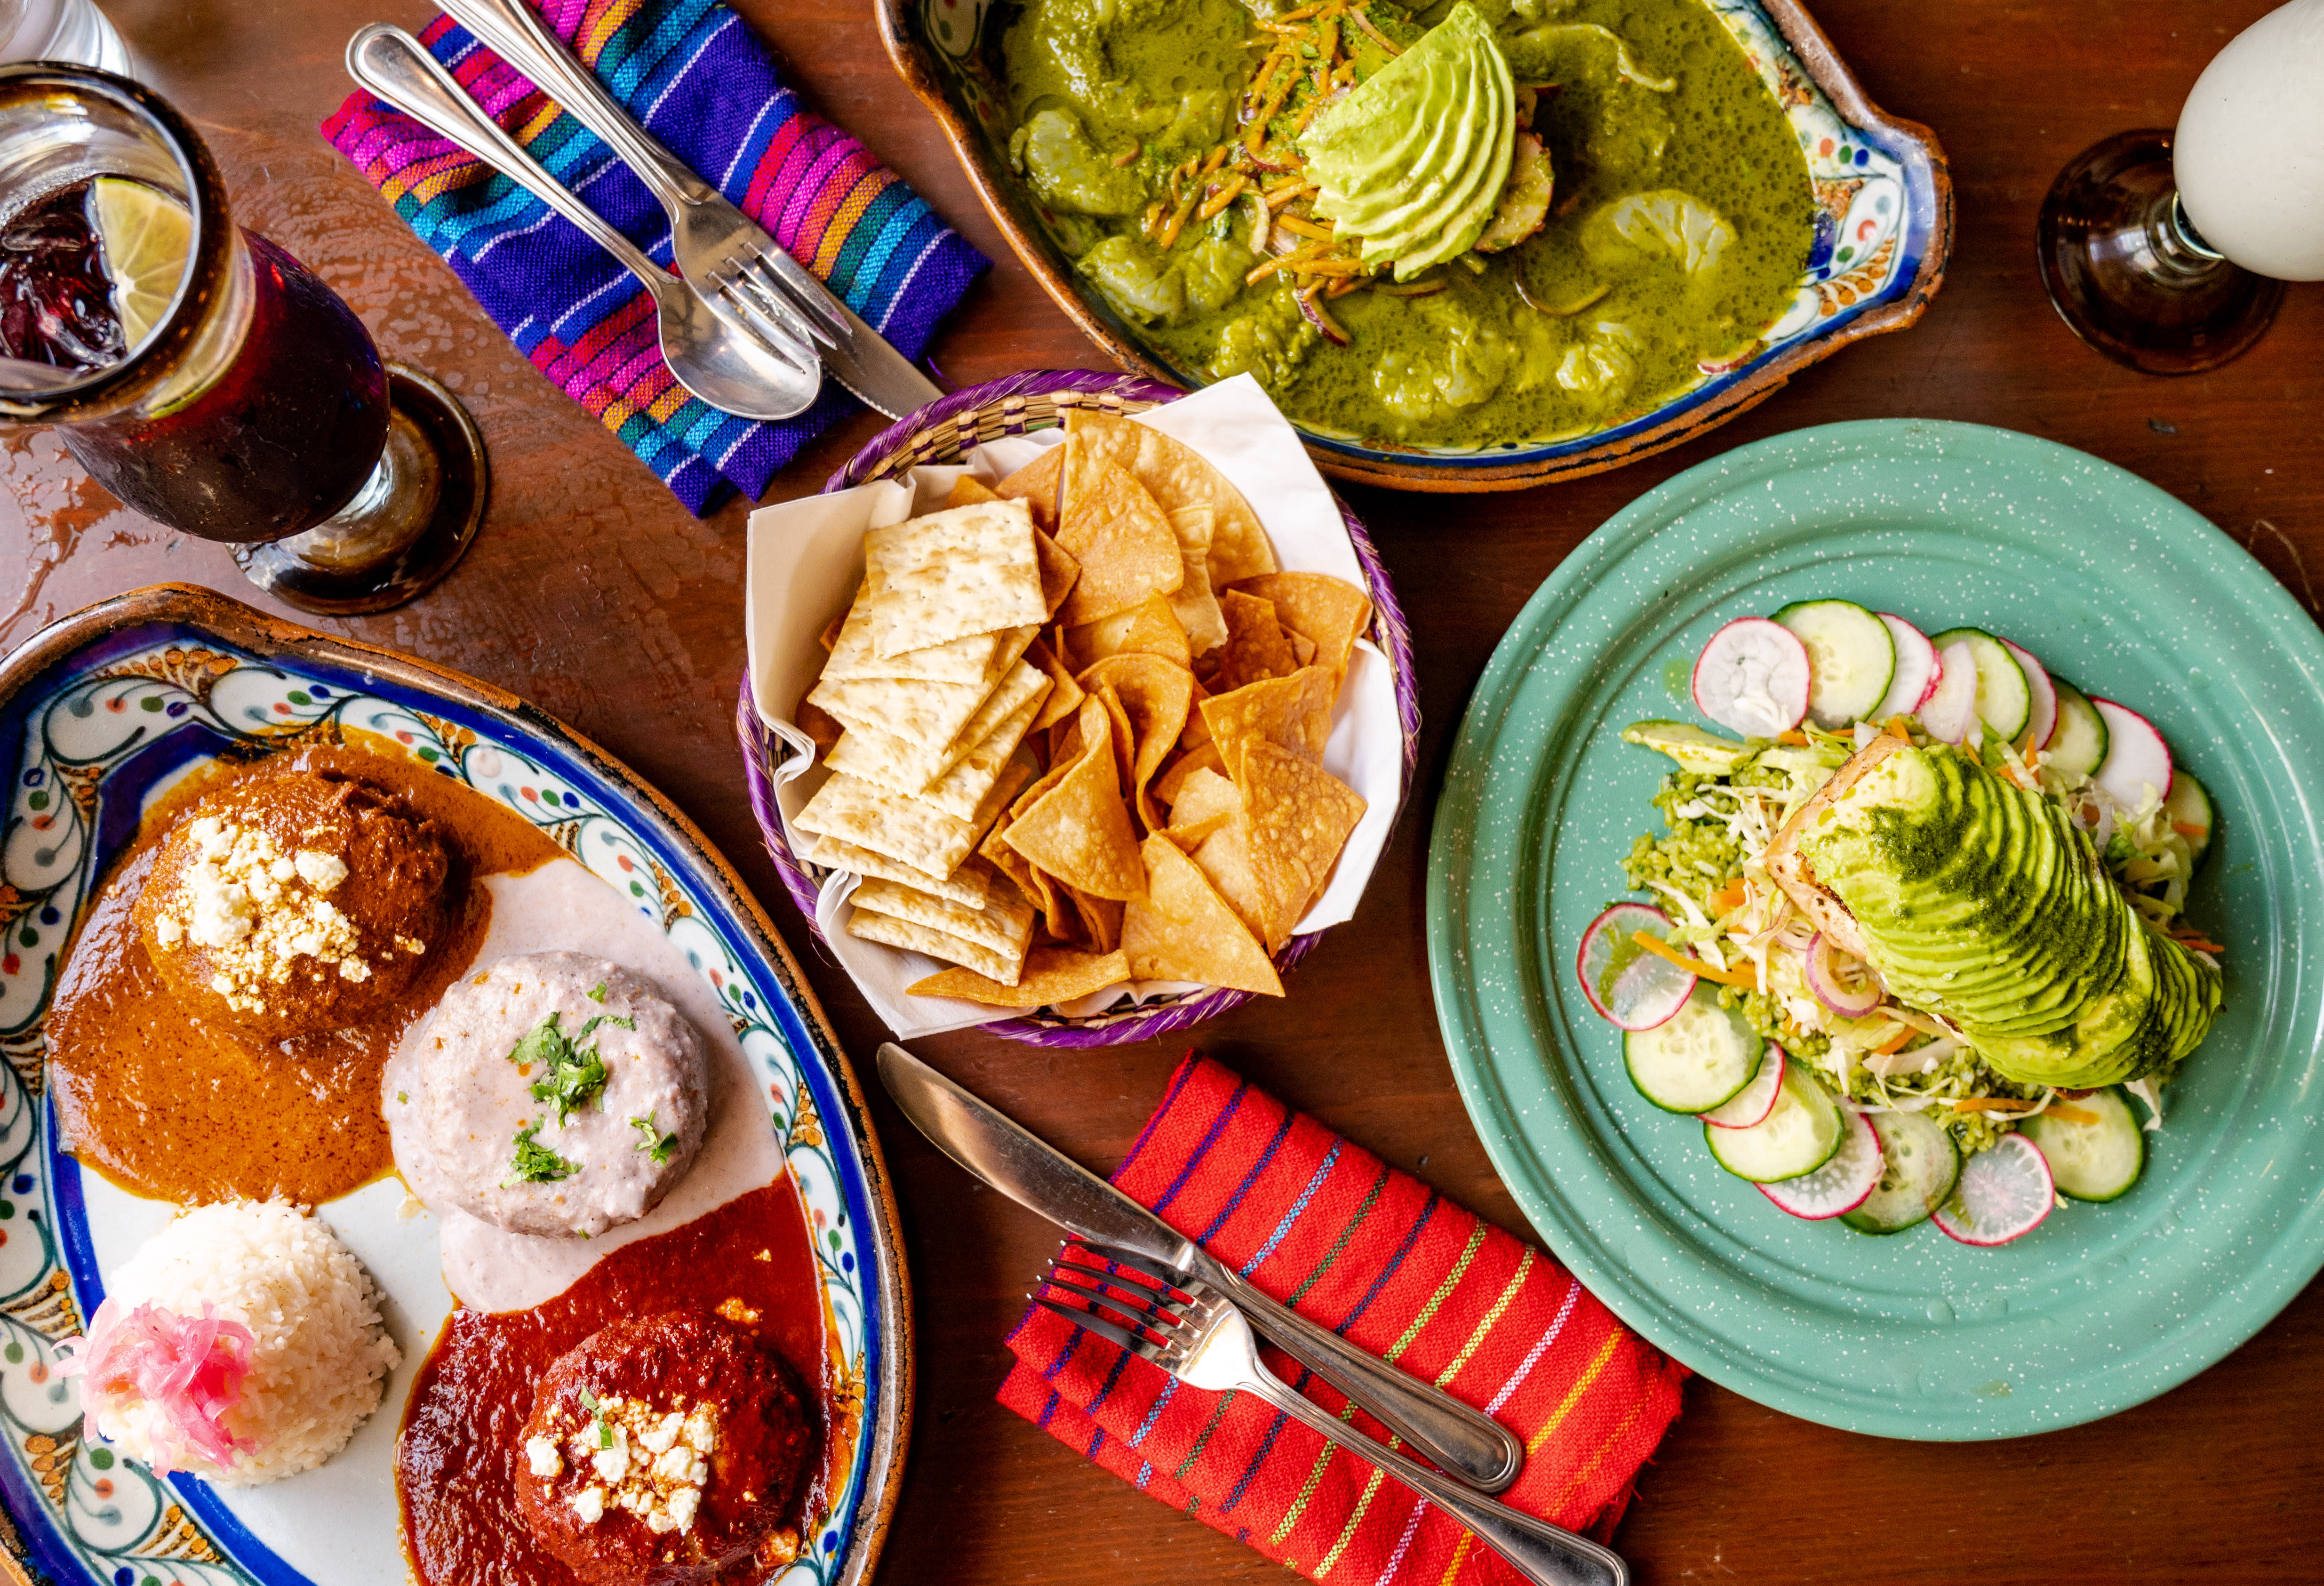 The 17 best Mexican restaurants in Philly. - Philadelphia - The Infatuation